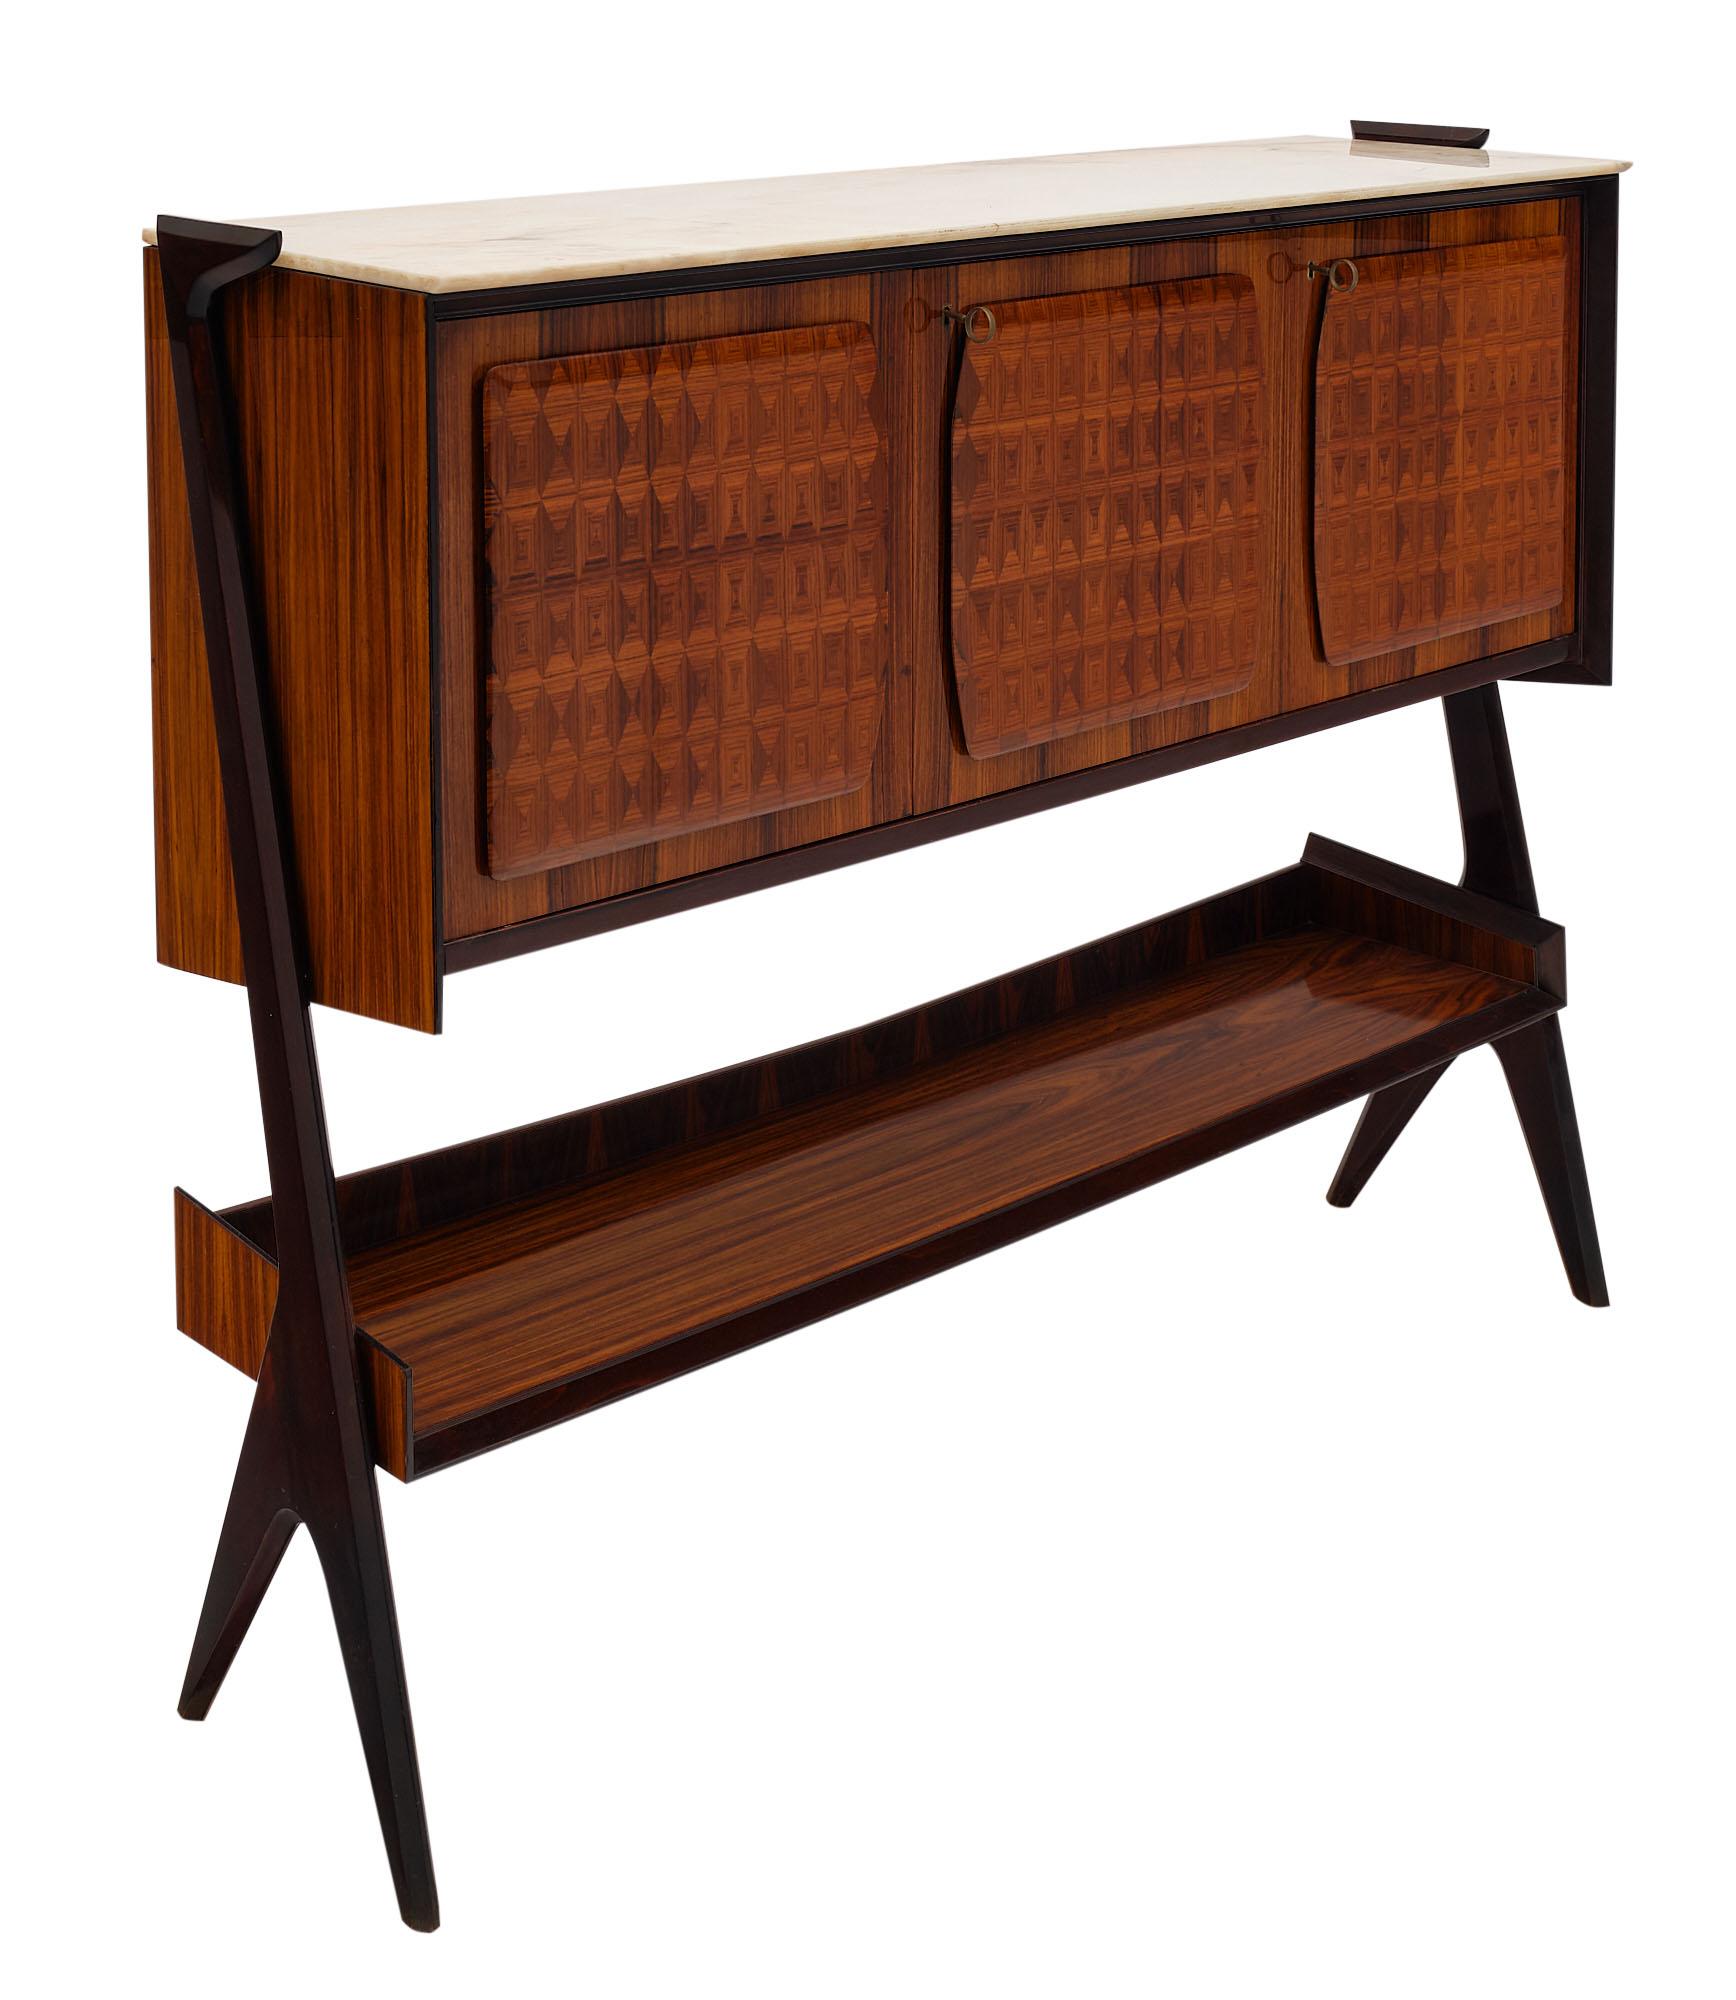 Buffet/bar from Italy by Osvaldo Borsani. This piece is made of rosewood and parqueted rosewood with lemon wood interiors. It has an adjustable shelf and dovetailed drawers. This elegant cabinet is finished with a lustrous French polish. There is a